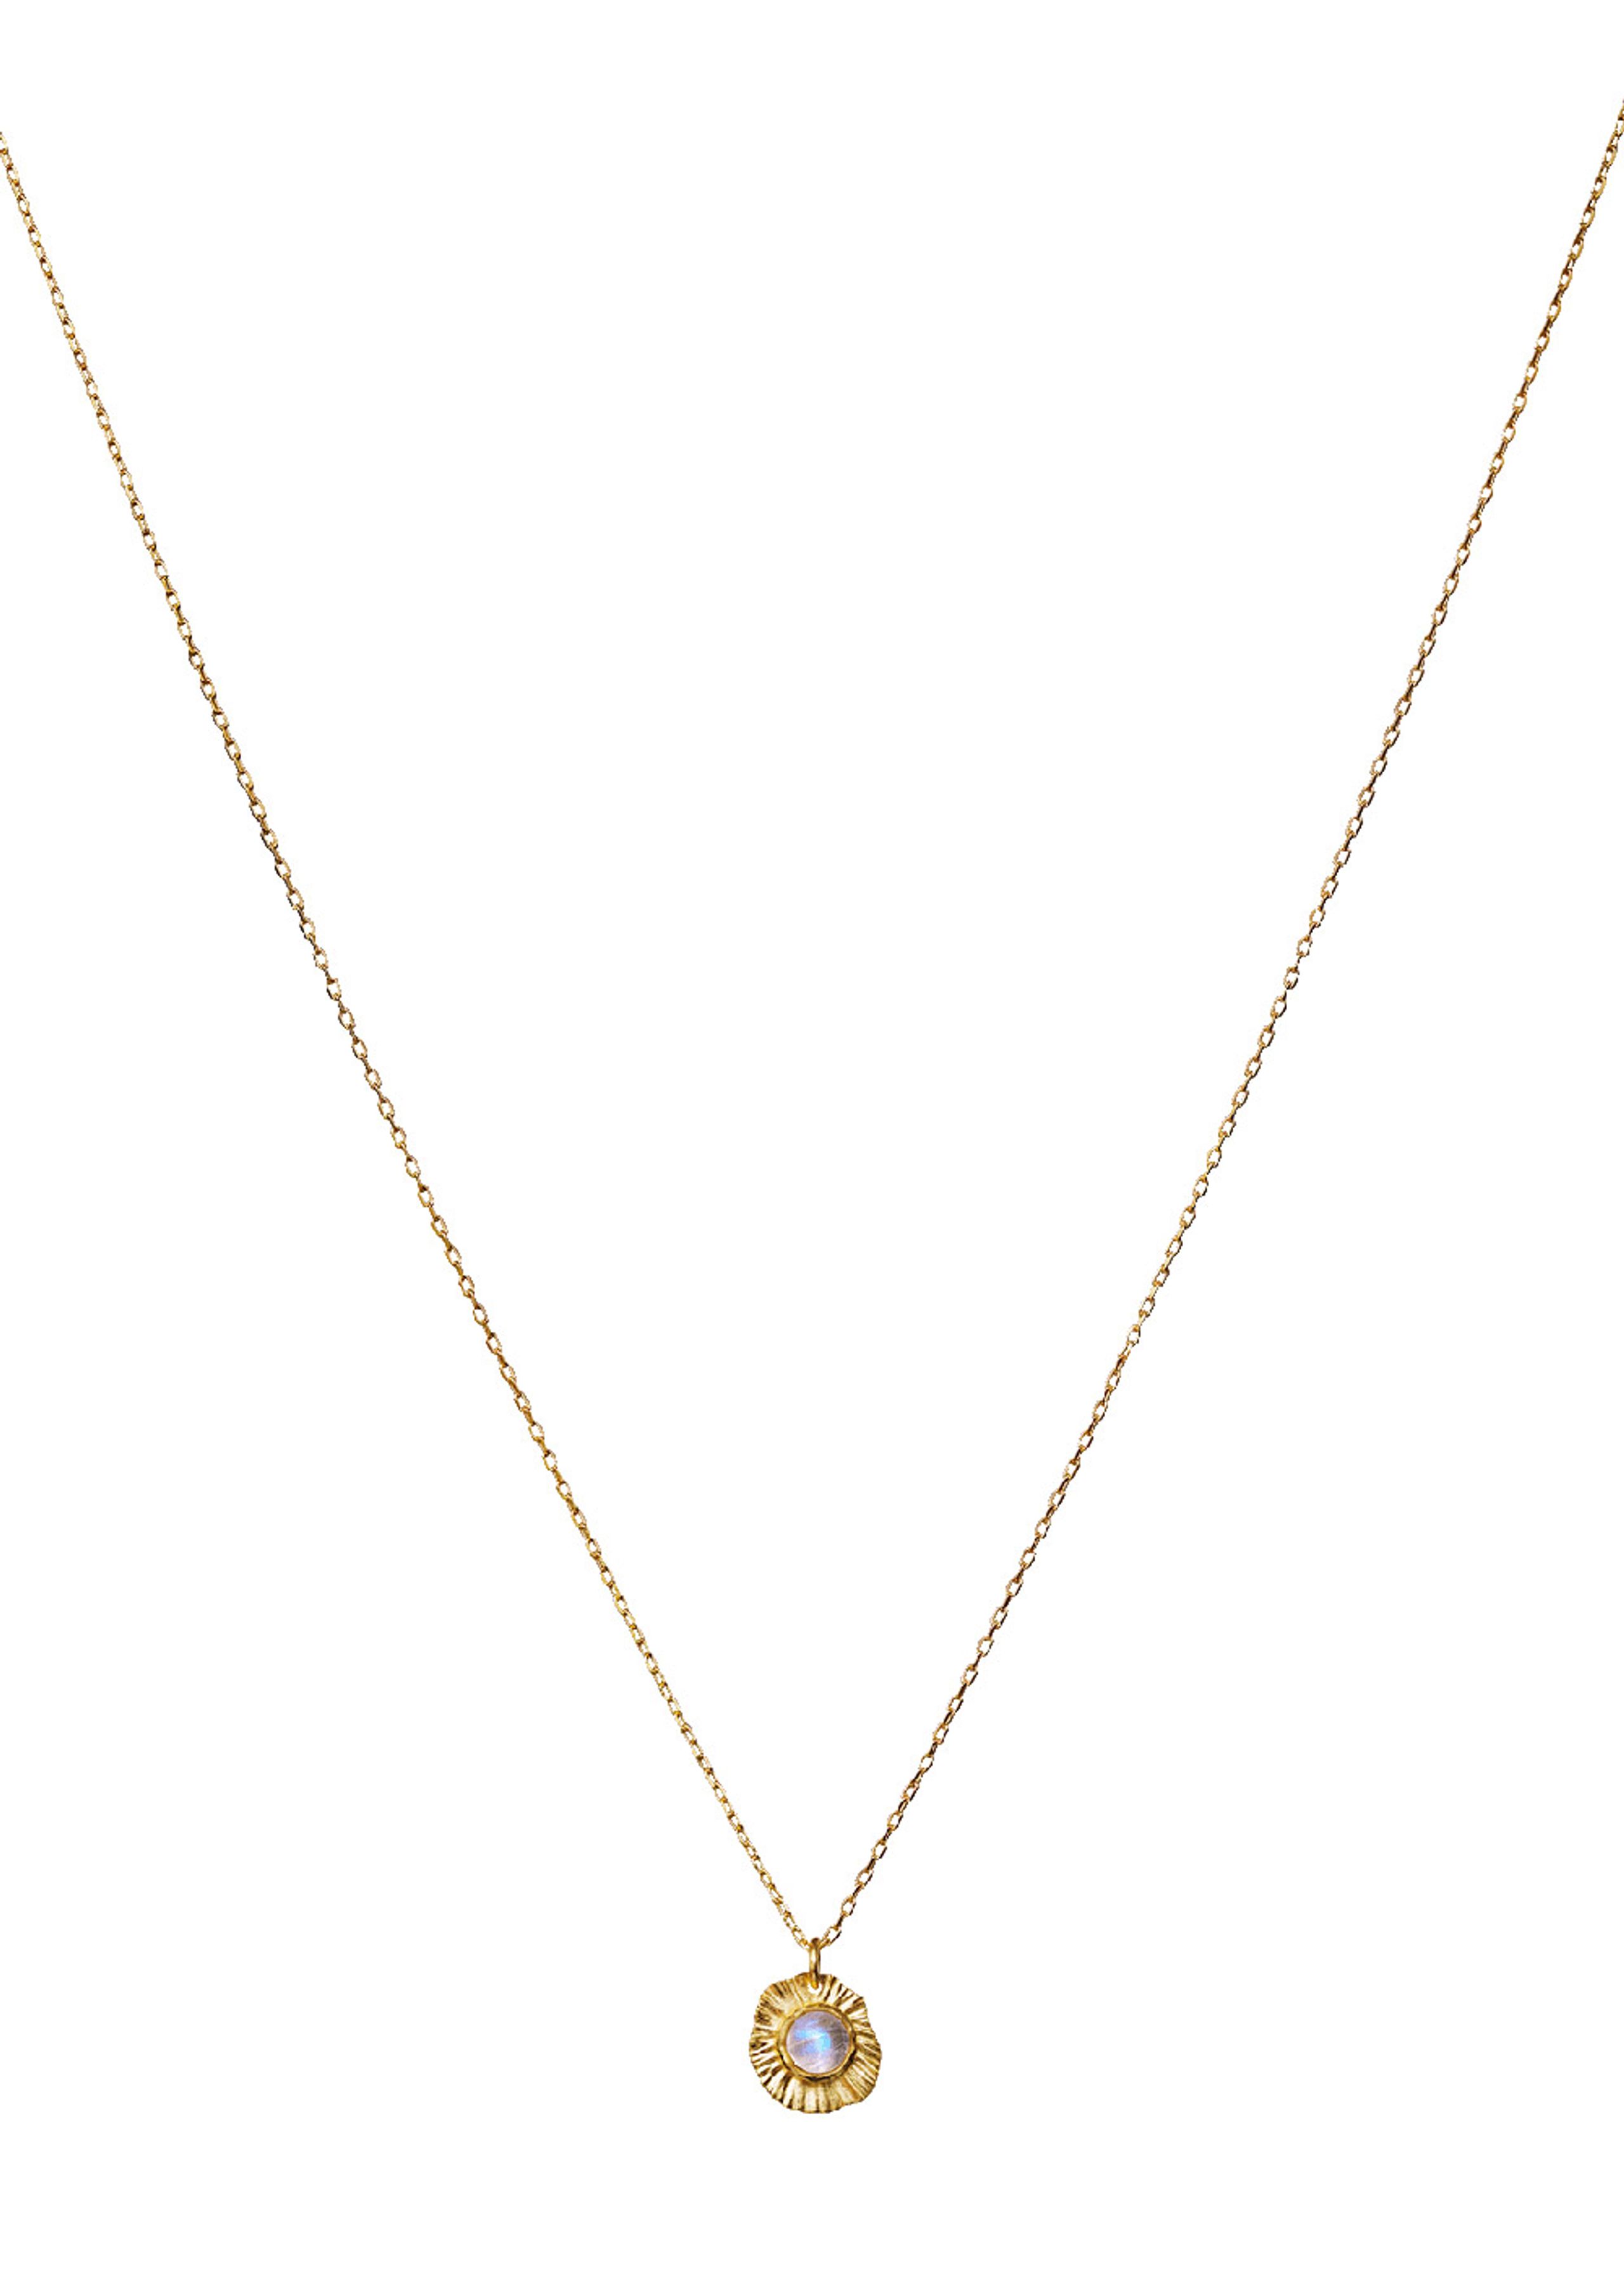 Maanesten - Astra Necklace - Necklace - Gold